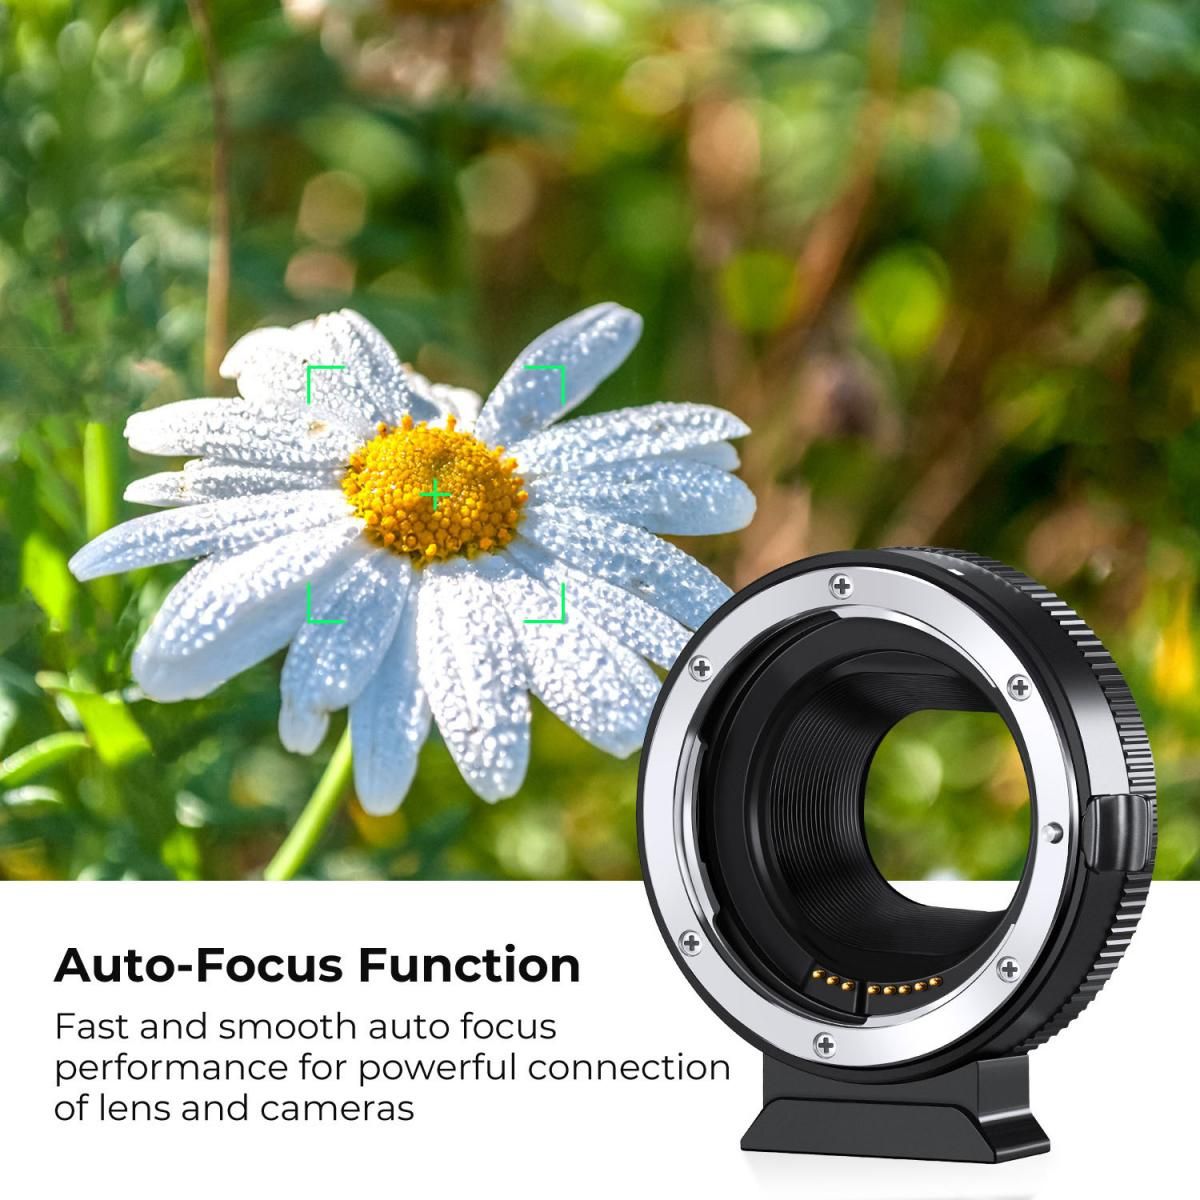 K&F Concept EF-EOS M High-Speed Auto Focus Adapter for Canon EF / EF-S Lens to M Mount Full Frame & APS-C Camera EOS M3 M5 M6 M10 M50 M100 M200